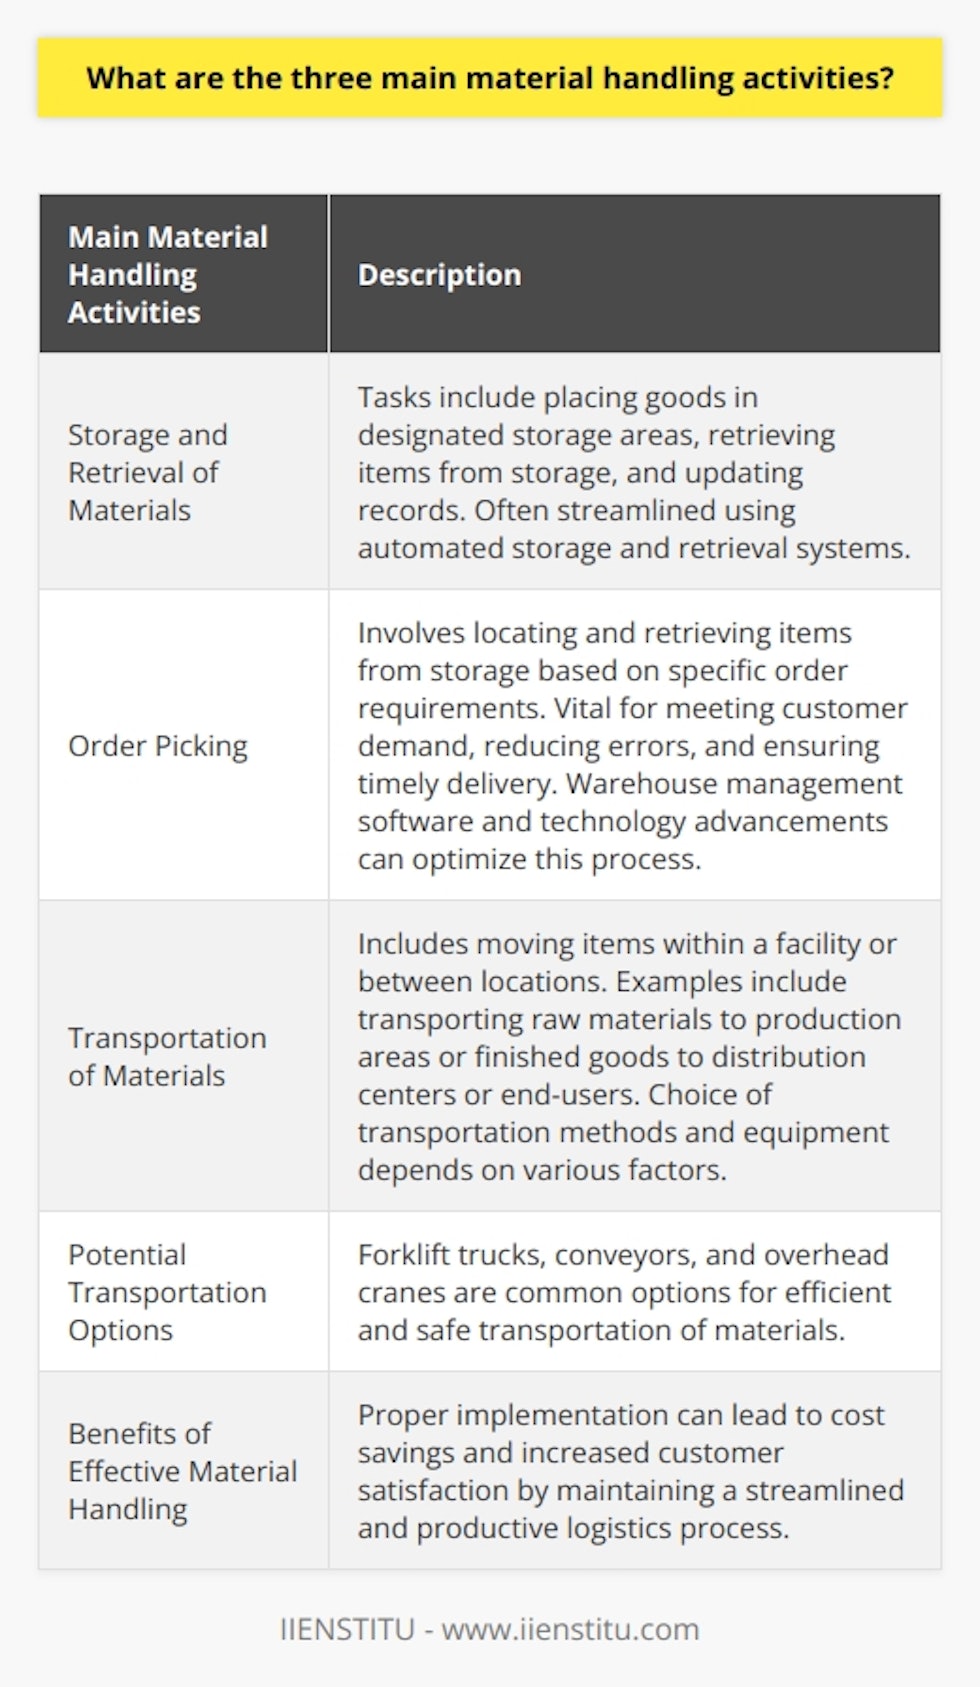 The three main material handling activities are storage and retrieval of materials, order picking, and transportation of materials.Storage and retrieval of materials is crucial for maintaining an organized inventory and maximizing resource utilization. Tasks may include placing goods in designated storage areas, retrieving items from storage, and updating records. Automated storage and retrieval systems are often used to streamline this process.Order picking involves locating and retrieving items from storage based on specific order requirements. This process is vital for meeting customer demand, reducing errors, and ensuring timely delivery. Warehouse management software and technology advancements can optimize order picking.Transportation of materials involves moving items within a facility or between locations. This may include transporting raw materials to production areas or finished goods to distribution centers or end-users. The choice of transportation methods and equipment depends on factors like item size and weight, required delivery speed, and environmental considerations.To ensure a safe and efficient transportation process, adequate planning and execution are essential. Potential transportation options include forklift trucks, conveyors, and overhead cranes. Effective material handling strategies can lead to cost savings and increased customer satisfaction.In conclusion, the three main material handling activities play a crucial role in maintaining a streamlined and productive logistics process. Implementing appropriate technology and management strategies can optimize these activities, resulting in cost savings and improved customer satisfaction.